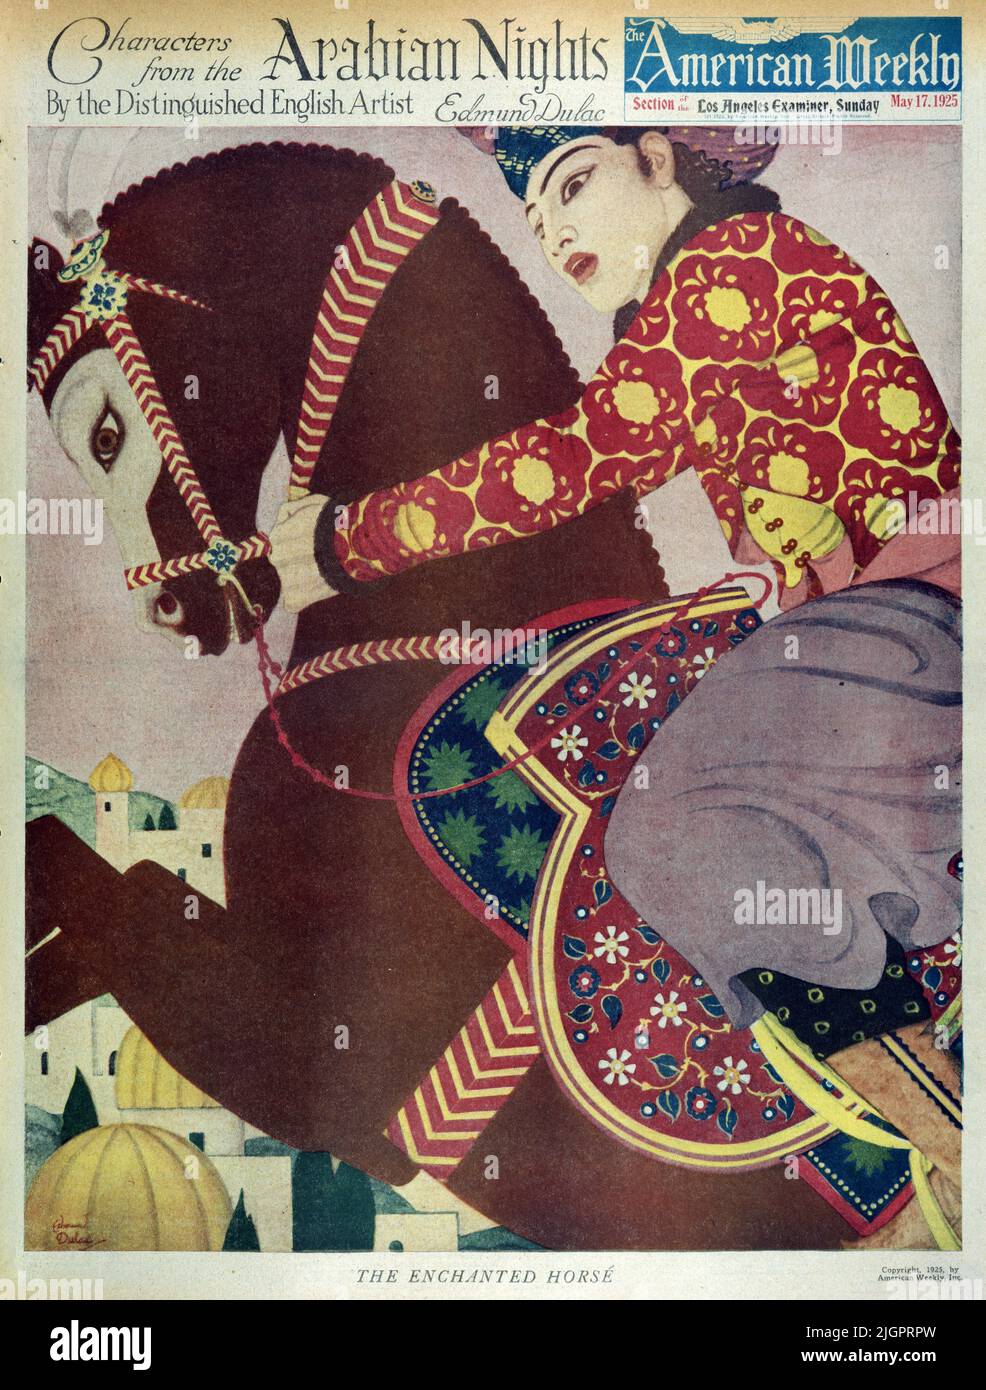 'The Enchanted Horse' published on May 17,1925 in the American Weekly Sunday magazine painted by Edmund Dulac as part of the 'Characters from the Arabian Nights' series. Stock Photo